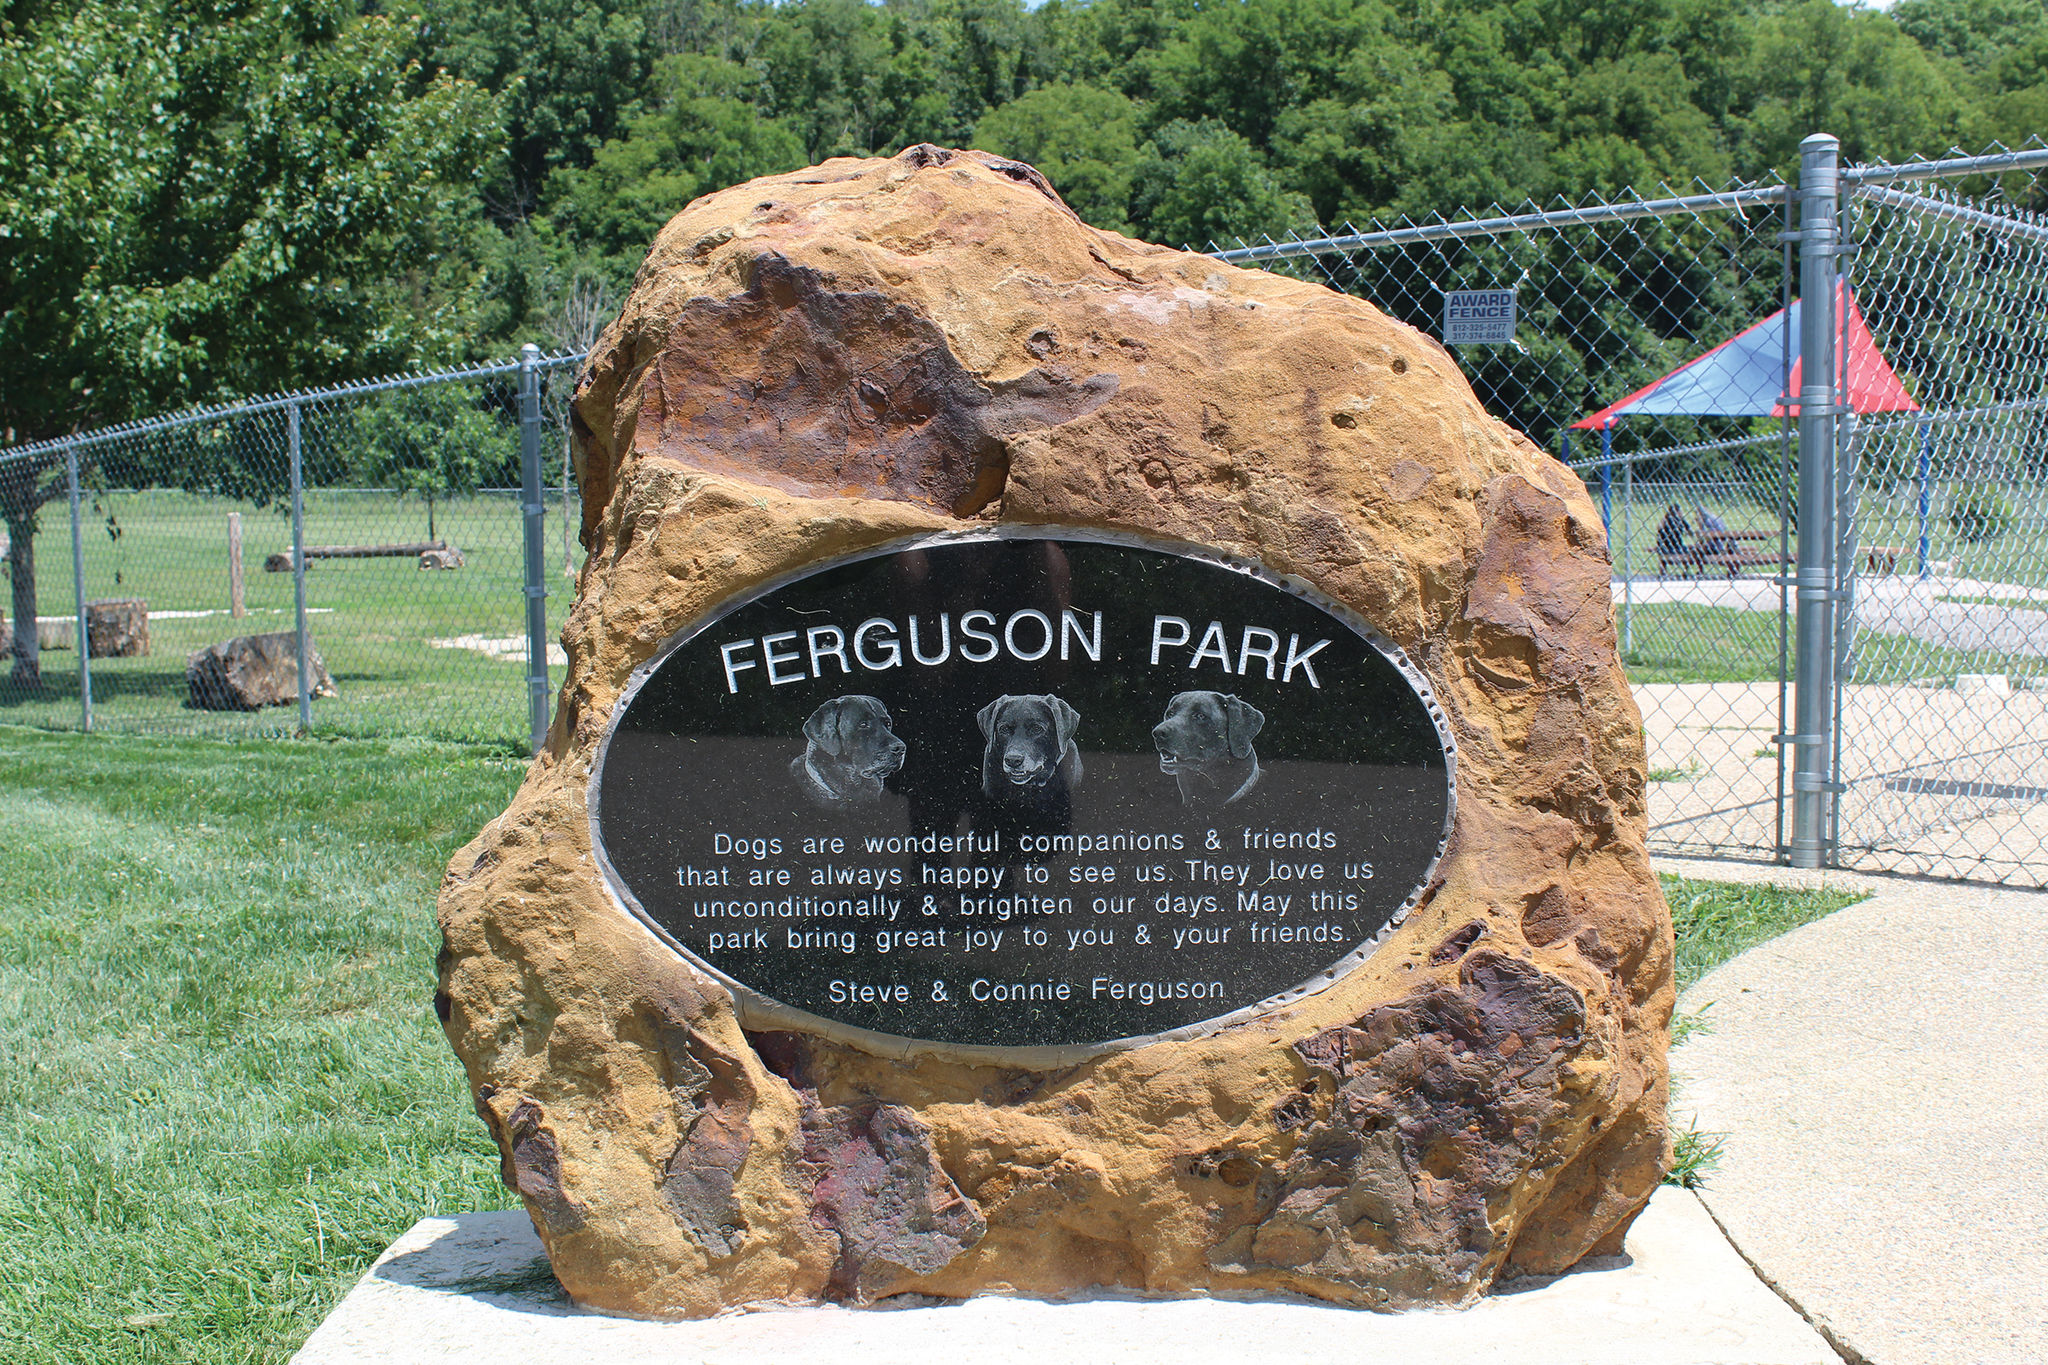 Ferguson Dog Park welcomes dog visitors and their humans